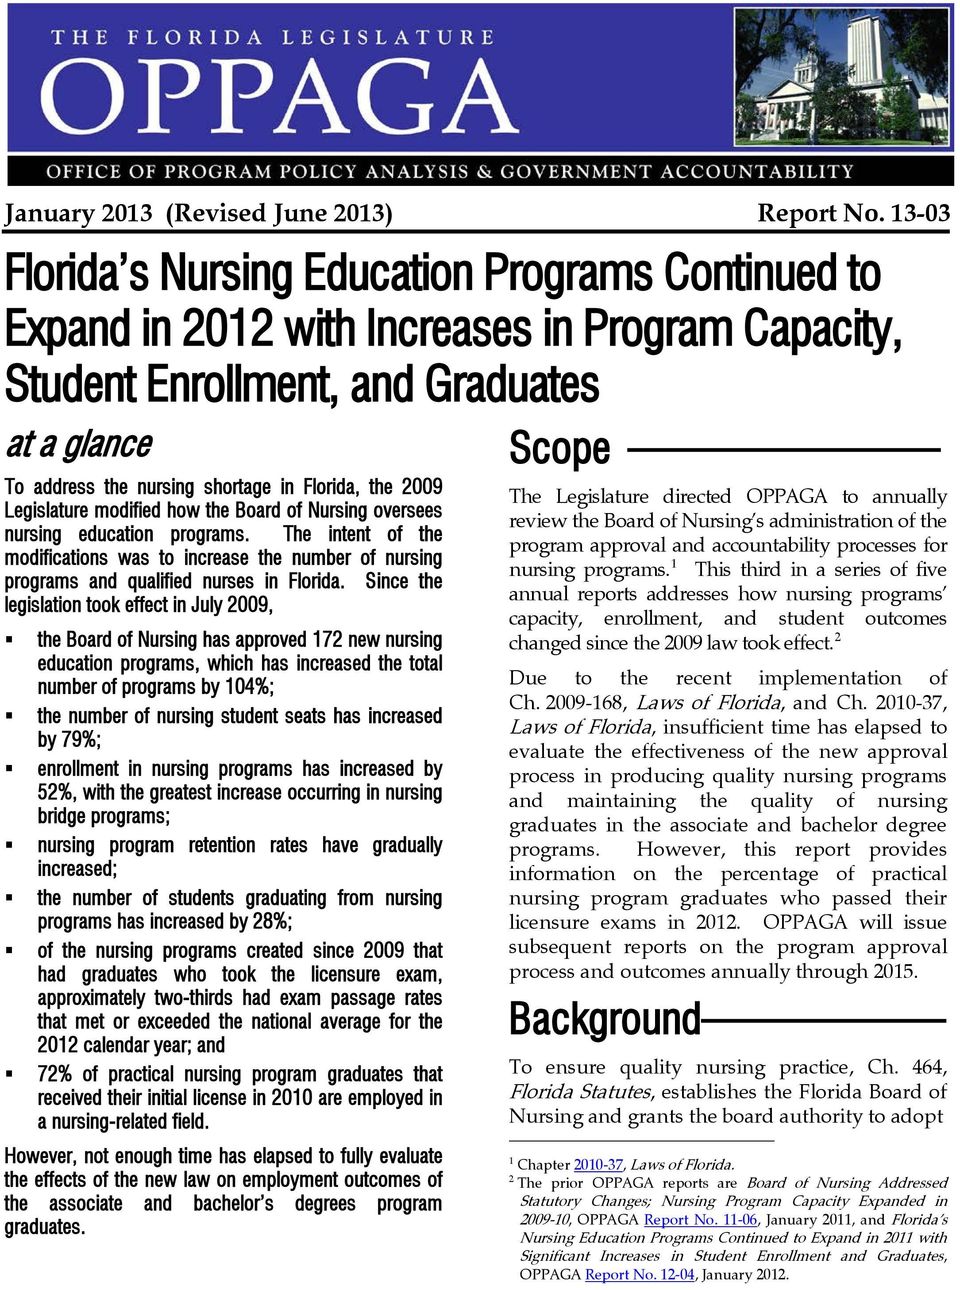 2009 Legislature modified how the Board of Nursing oversees nursing education programs. The intent of the modifications was to increase the number of nursing programs and qualified nurses in Florida.